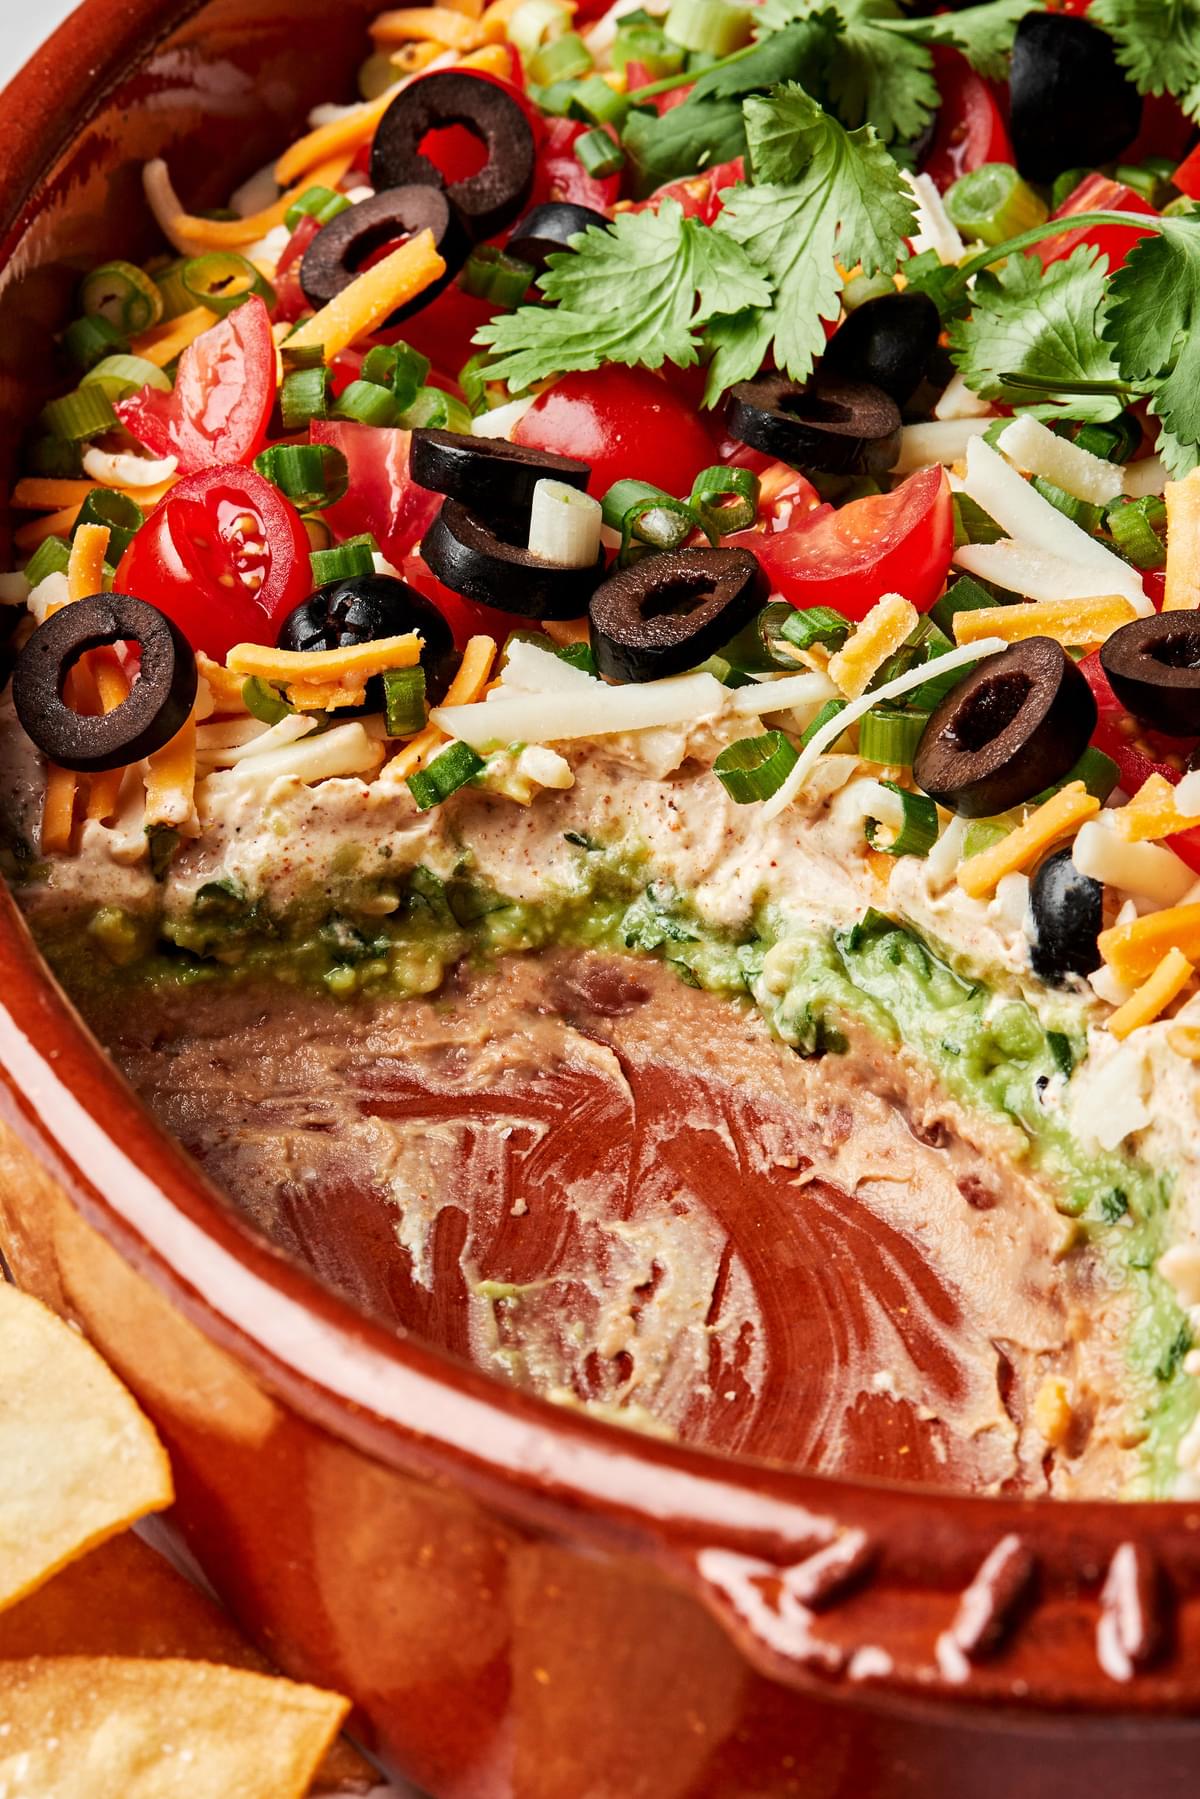 seven layer dip made with beans, sour cream, guacamole, cheese, olives, tomato, cilantro and green onions